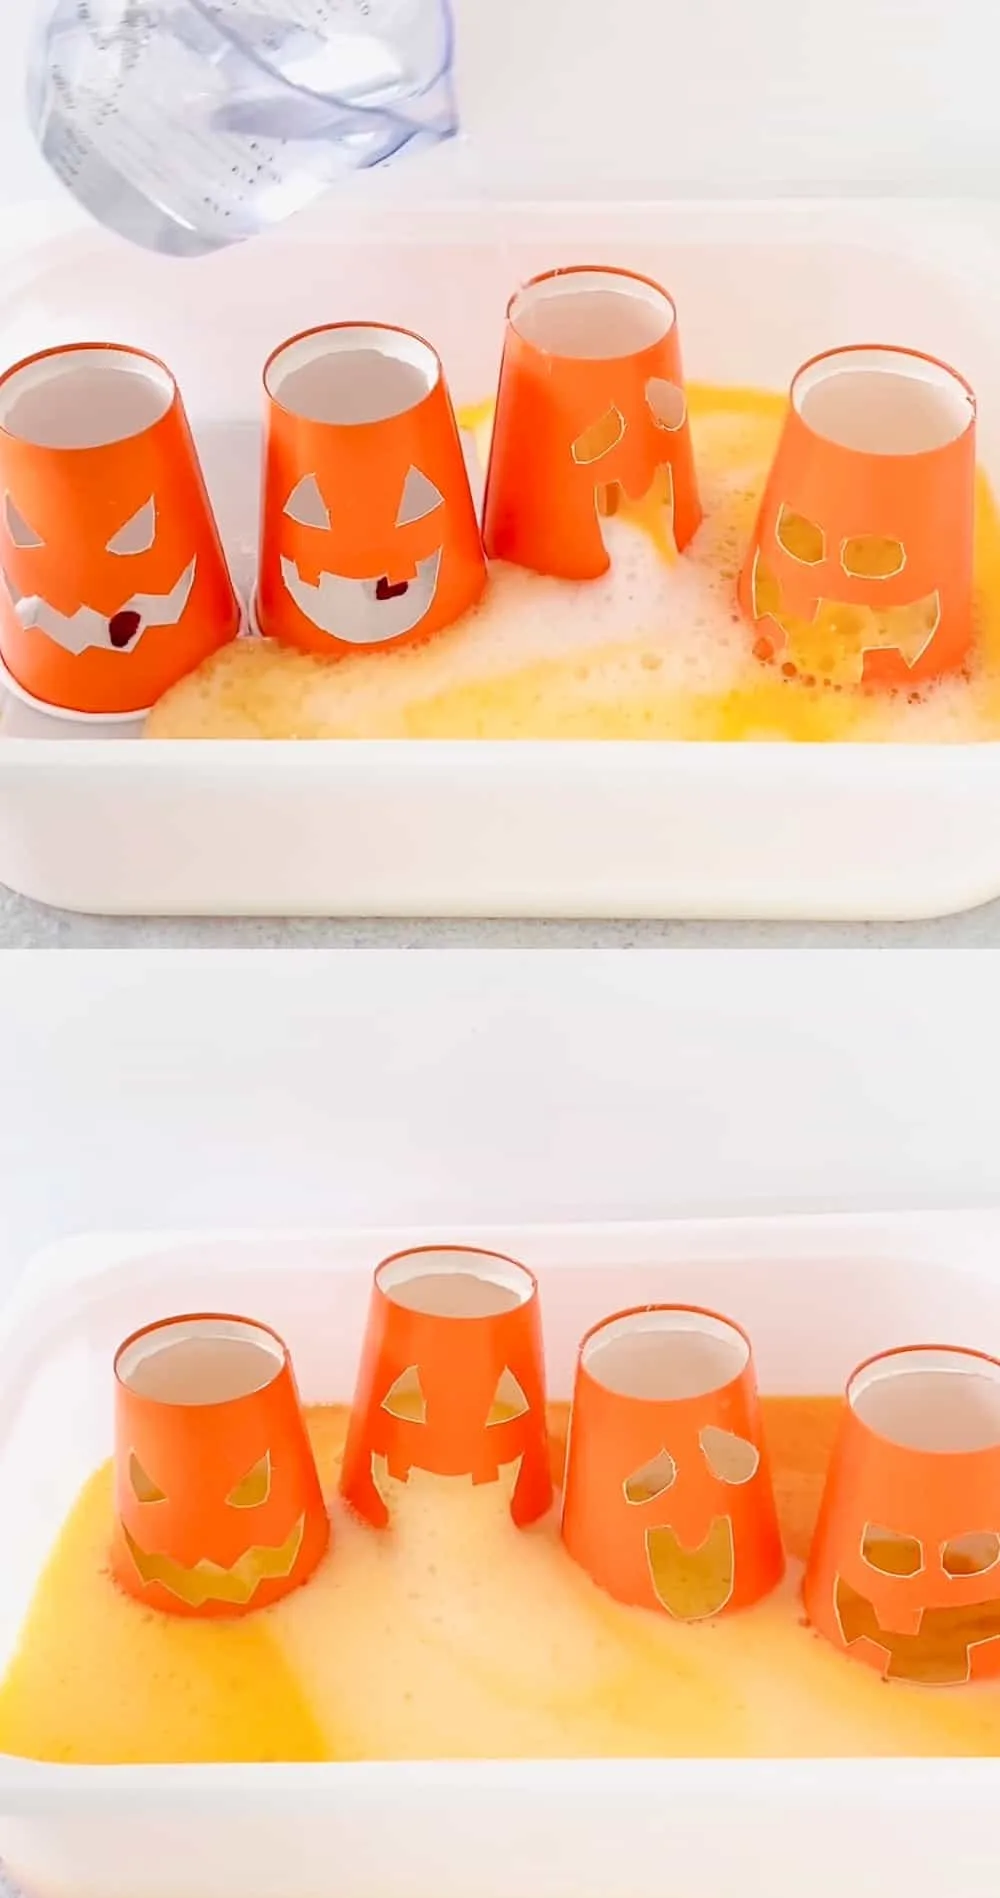 Pumpkin Baking Soda Vinegar Science Experiment. Use cups and carve out Jack O'Lantern faces to do this classic Halloween science project. 